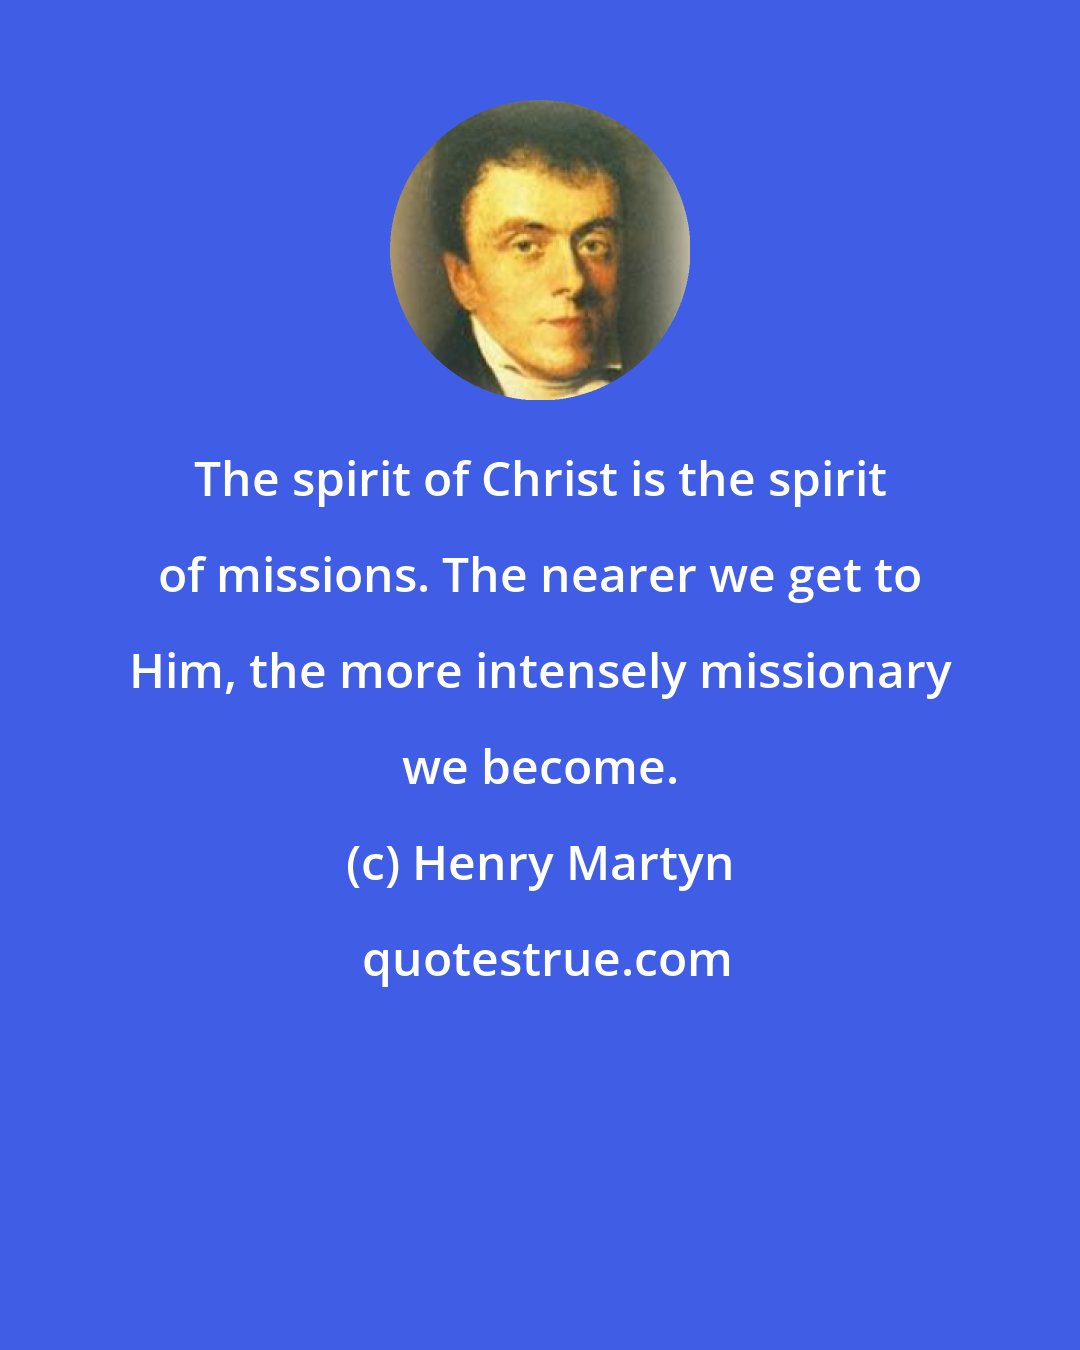 Henry Martyn: The spirit of Christ is the spirit of missions. The nearer we get to Him, the more intensely missionary we become.